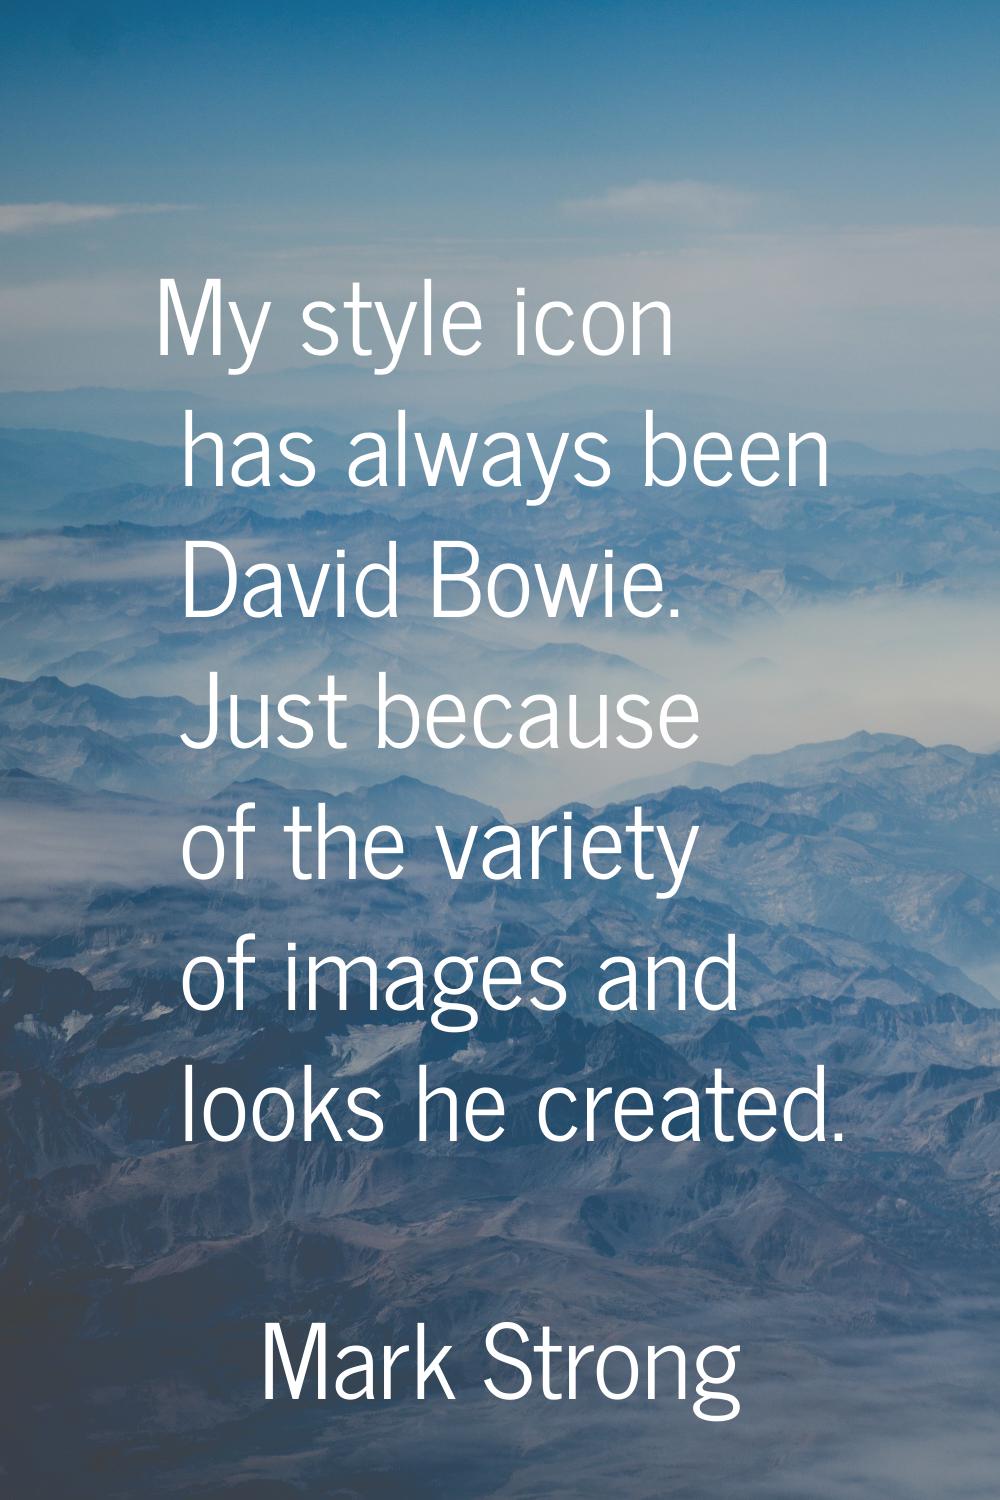 My style icon has always been David Bowie. Just because of the variety of images and looks he creat